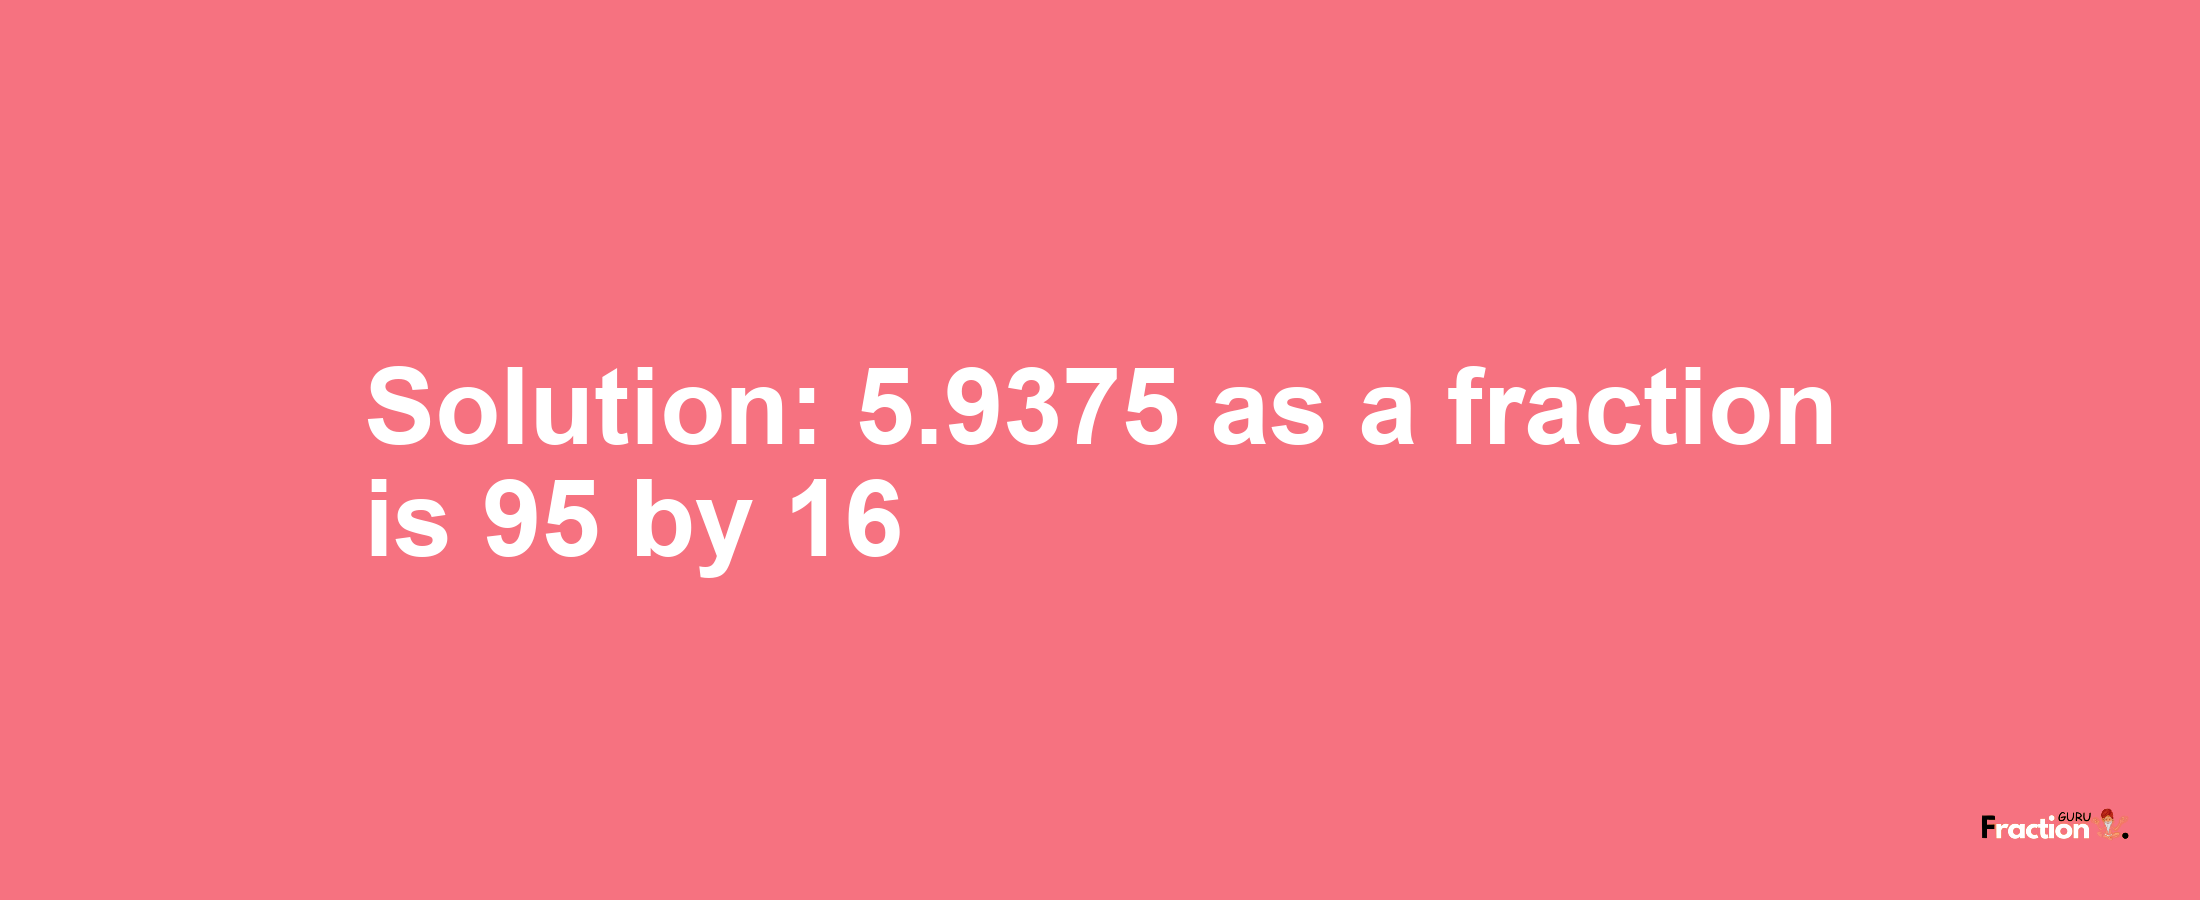 Solution:5.9375 as a fraction is 95/16